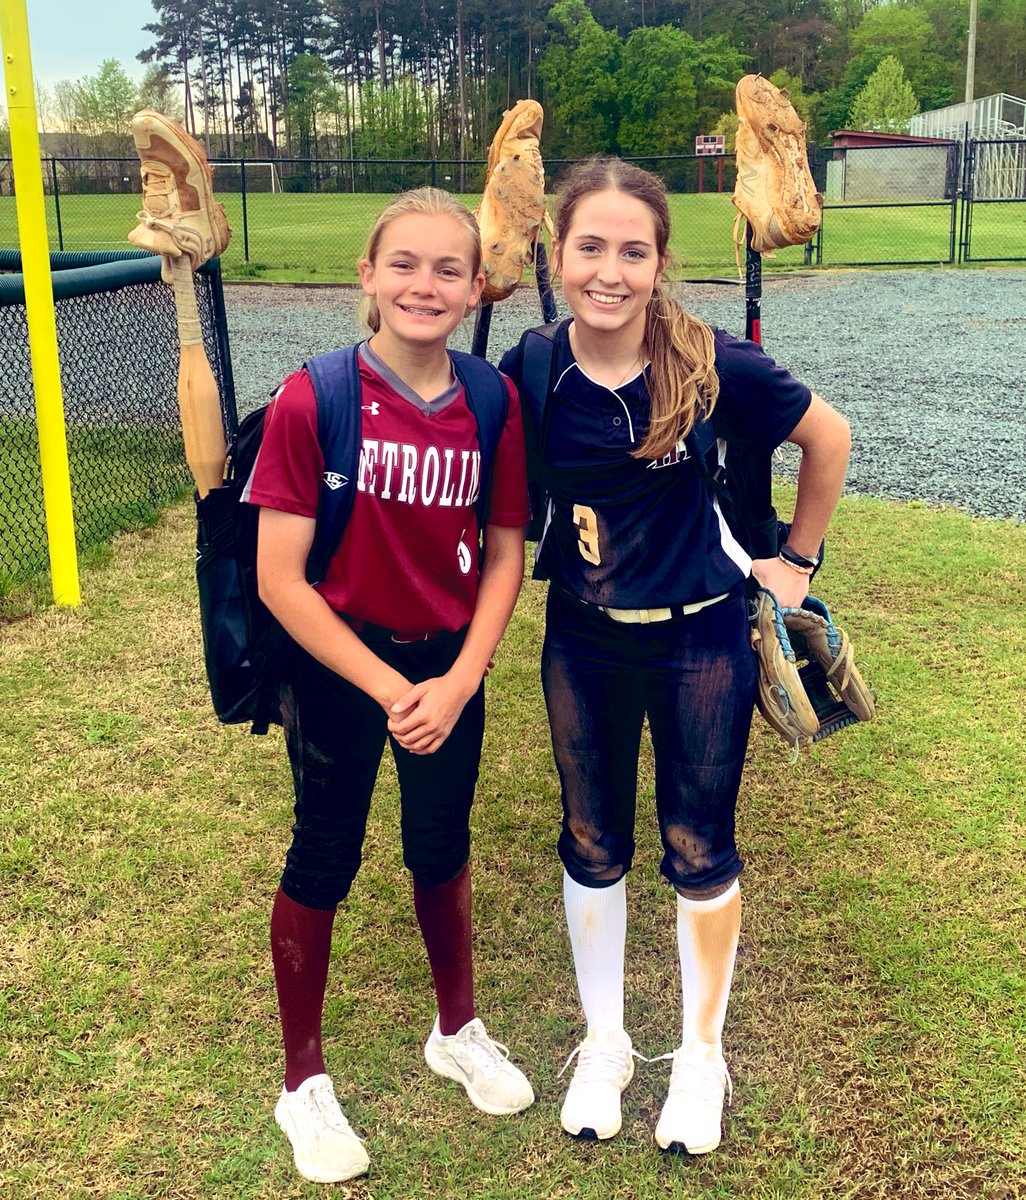 Addy Sailer (2028) and Callie Hill (2028) may get more swimming done in this rain than softball ☔️ … as long as it’s dry this weekend when they put on the same jerseys again!